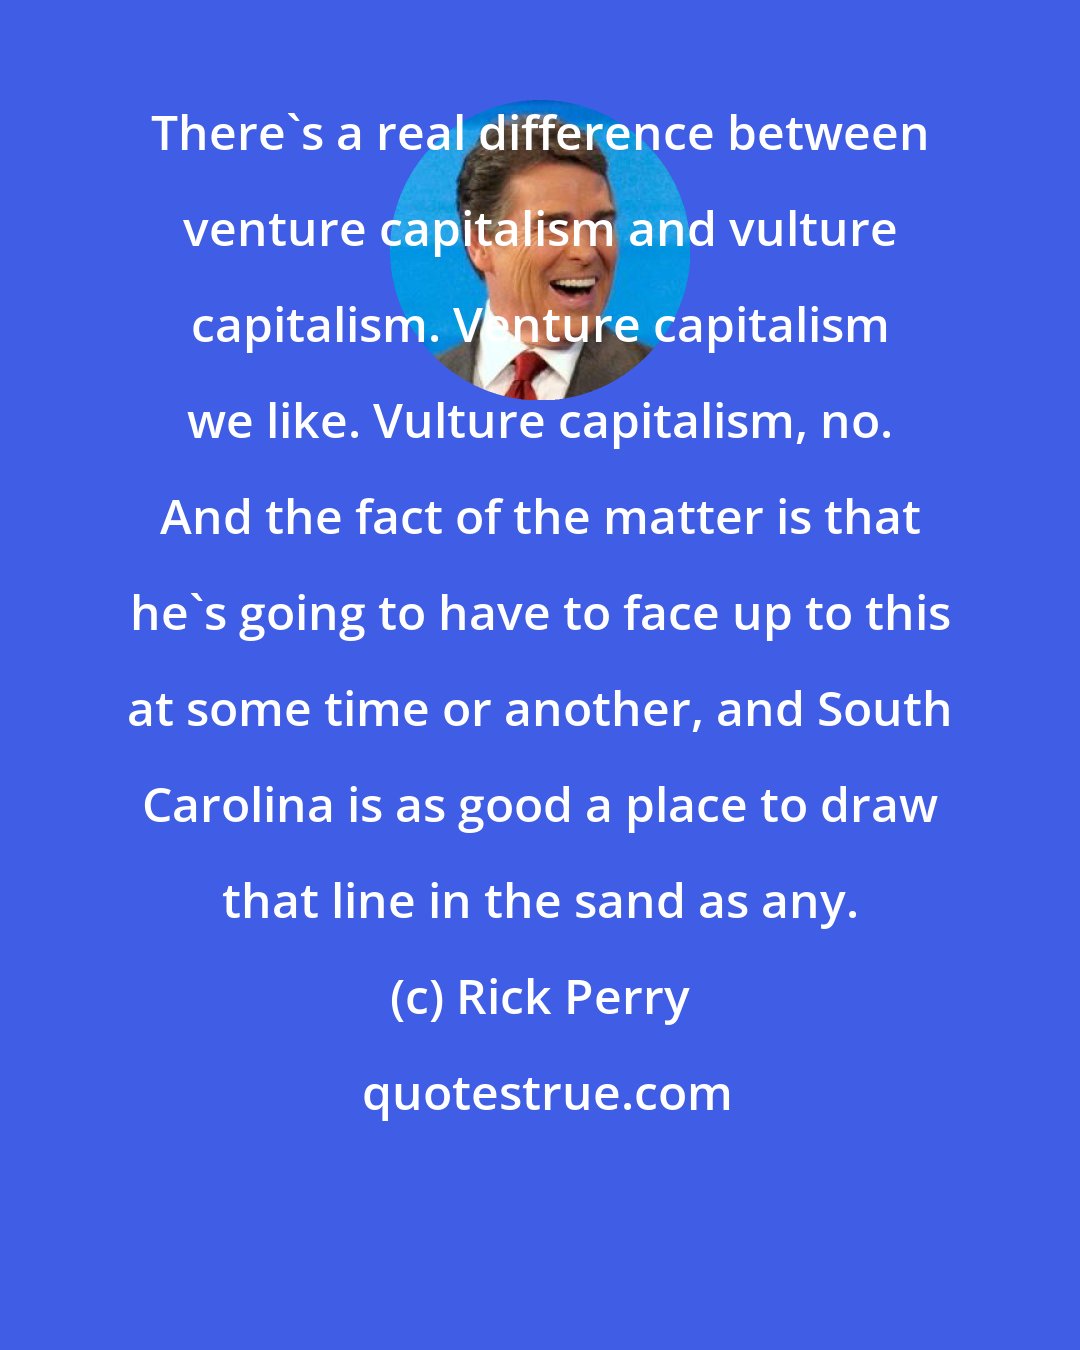 Rick Perry: There's a real difference between venture capitalism and vulture capitalism. Venture capitalism we like. Vulture capitalism, no. And the fact of the matter is that he's going to have to face up to this at some time or another, and South Carolina is as good a place to draw that line in the sand as any.